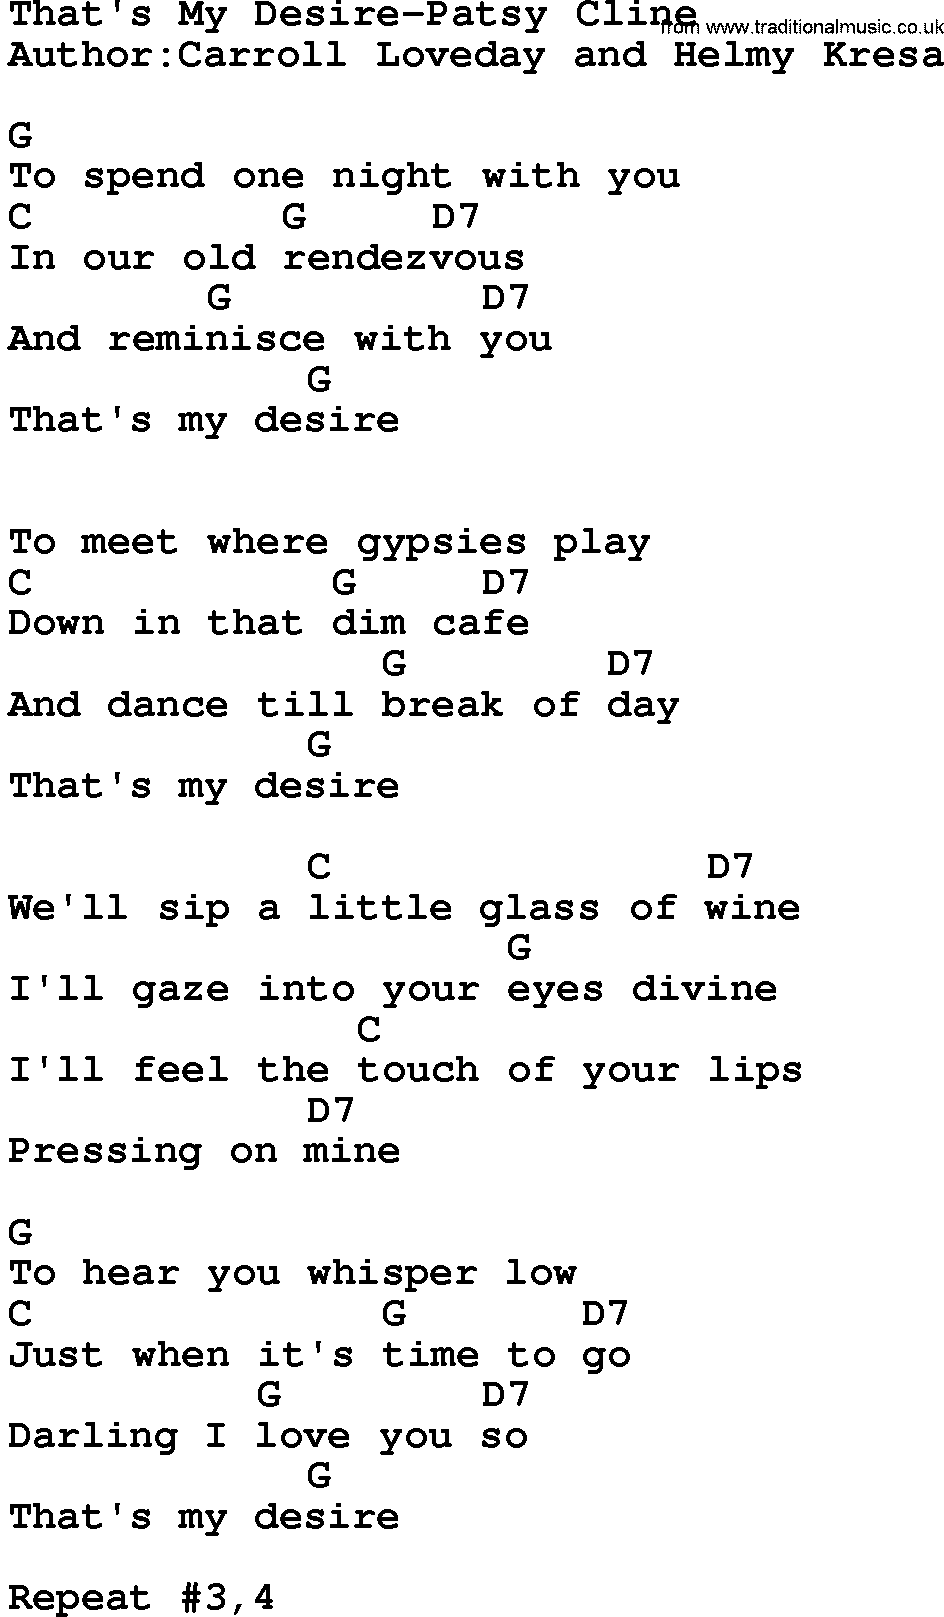 Country music song: That's My Desire-Patsy Cline lyrics and chords